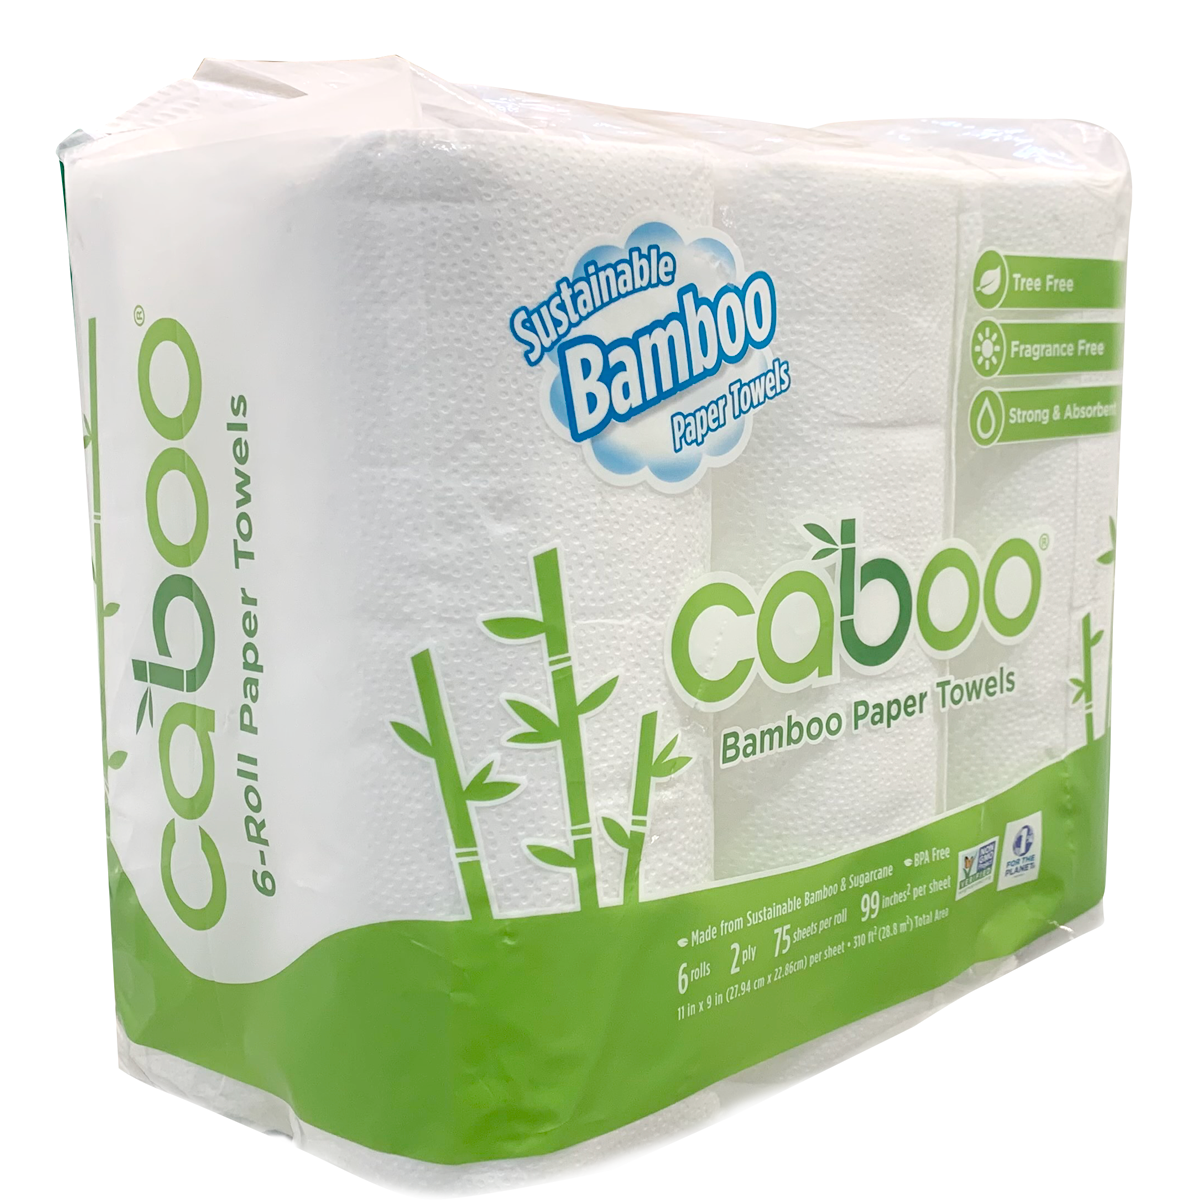 Caboo Kitchen Roll Towels 6-Pack